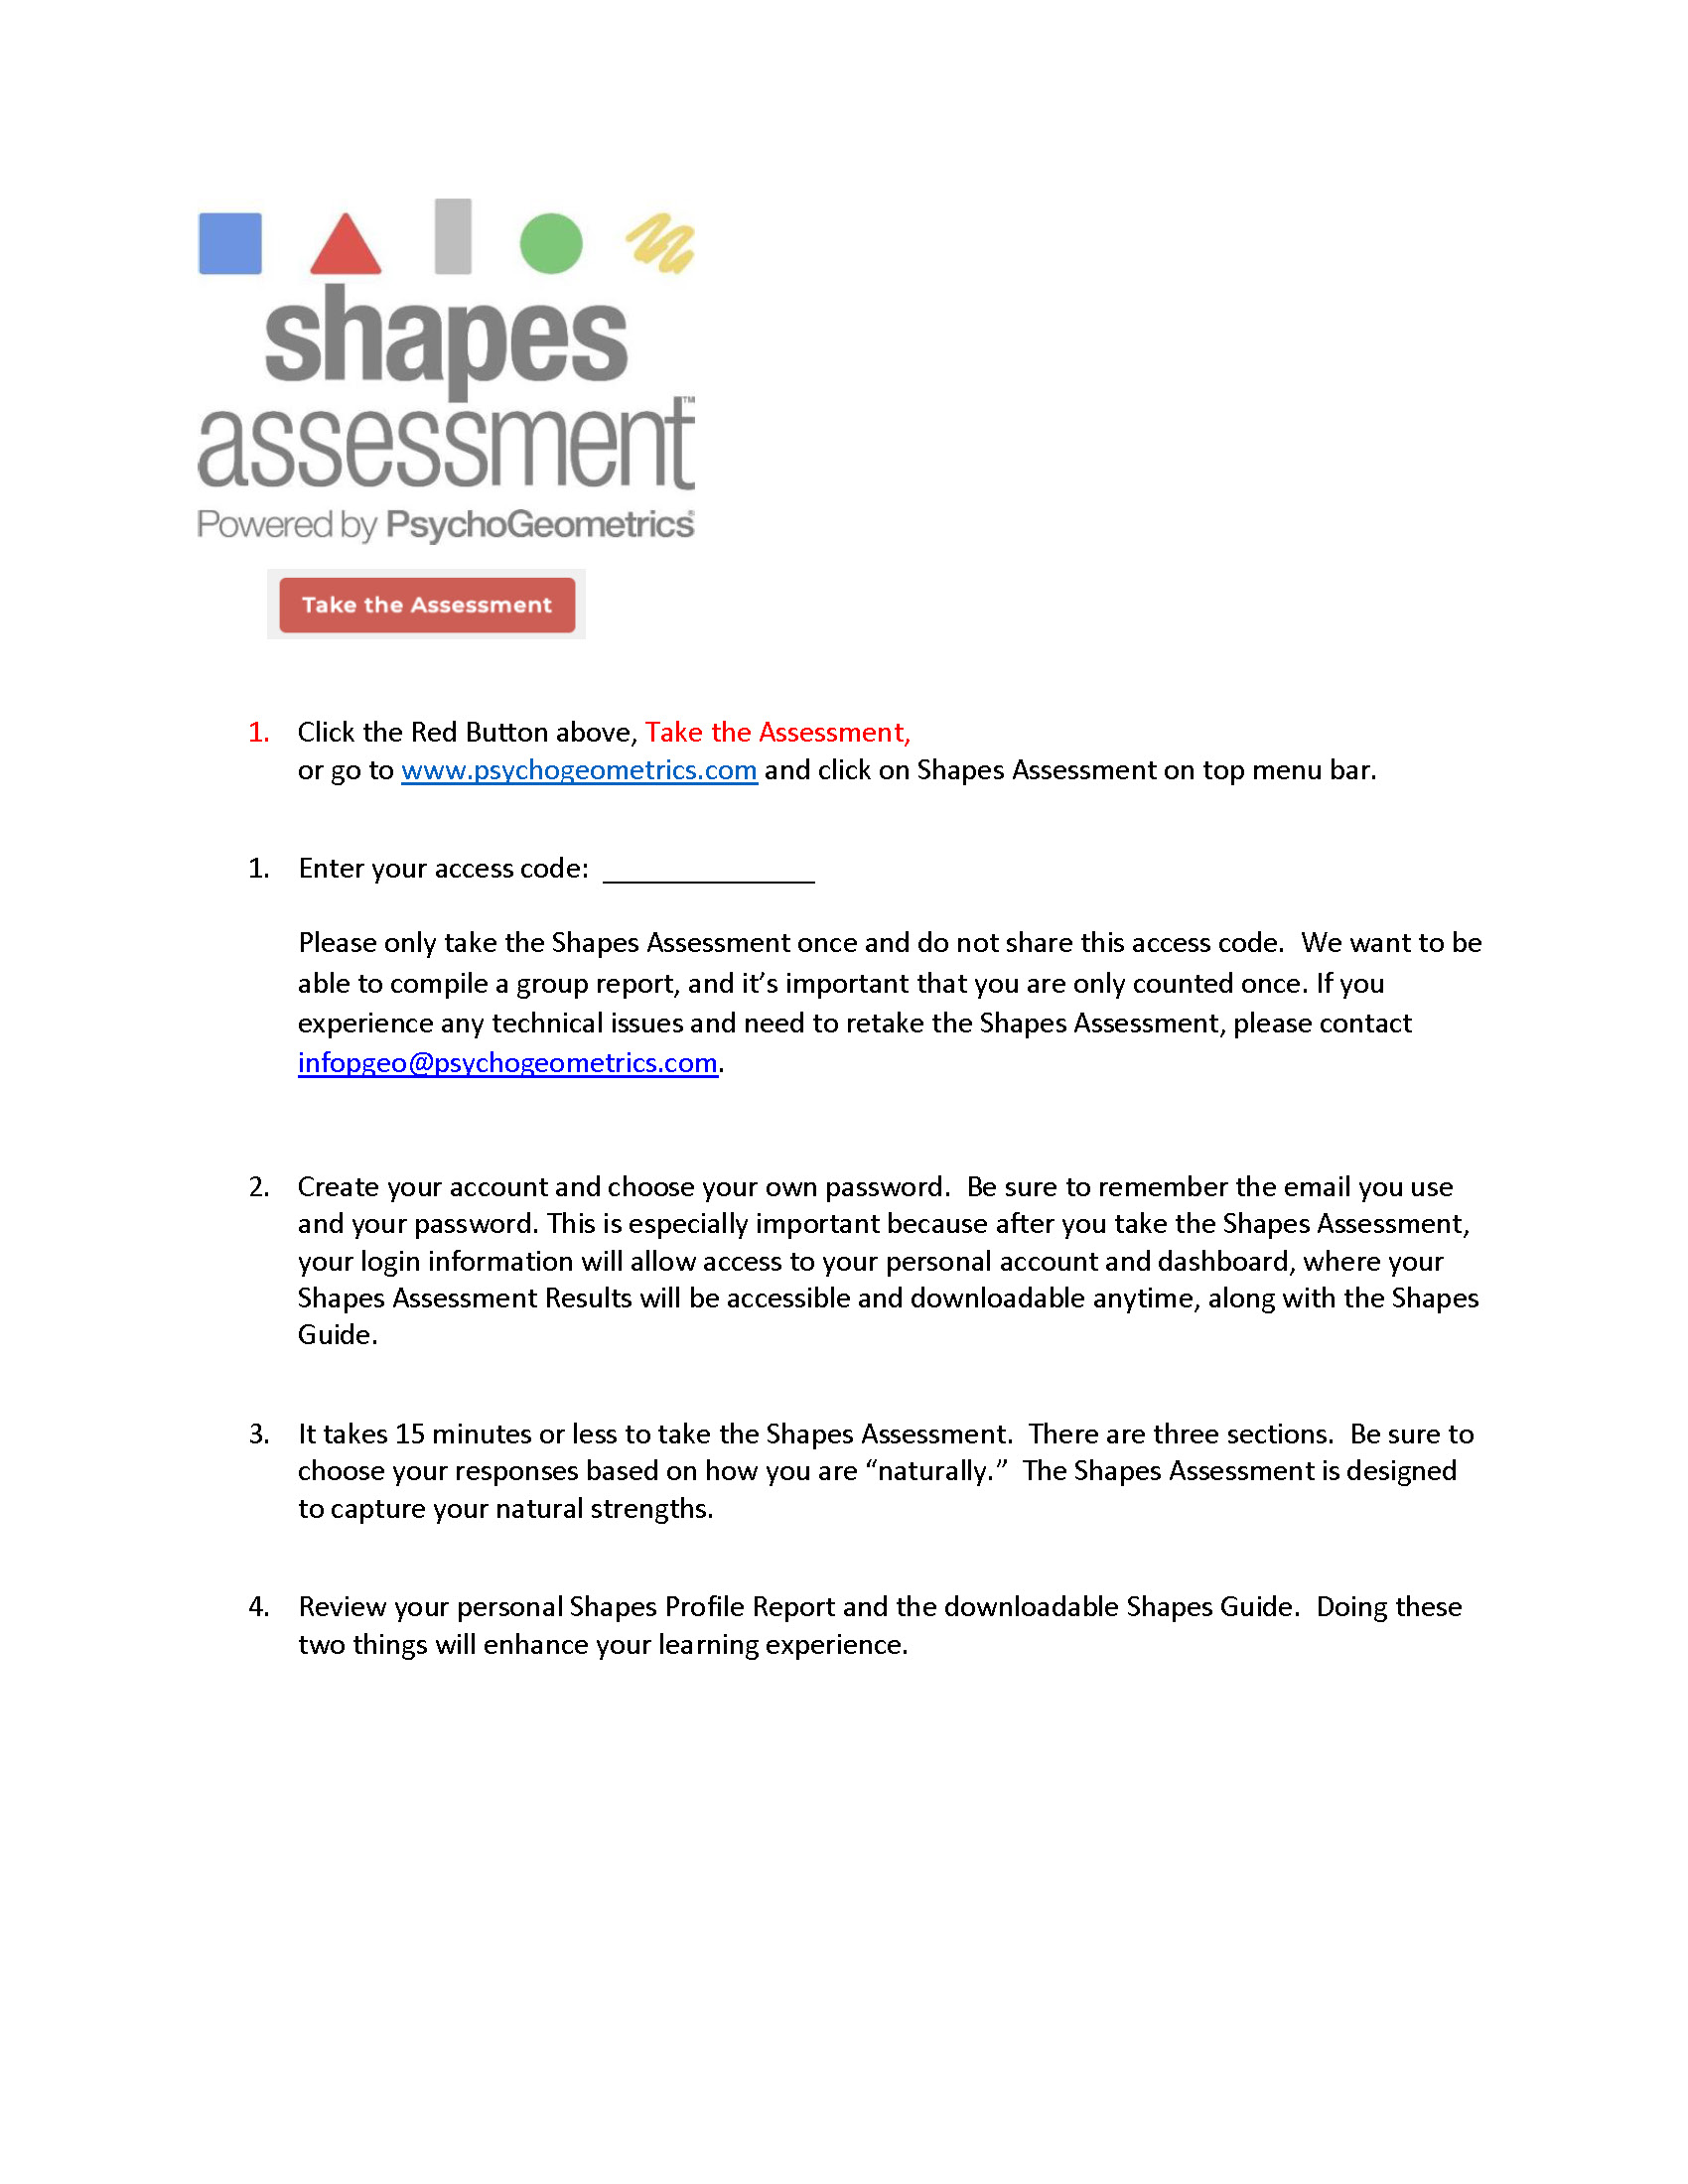 Instructions to take the Shapes Online Assessment